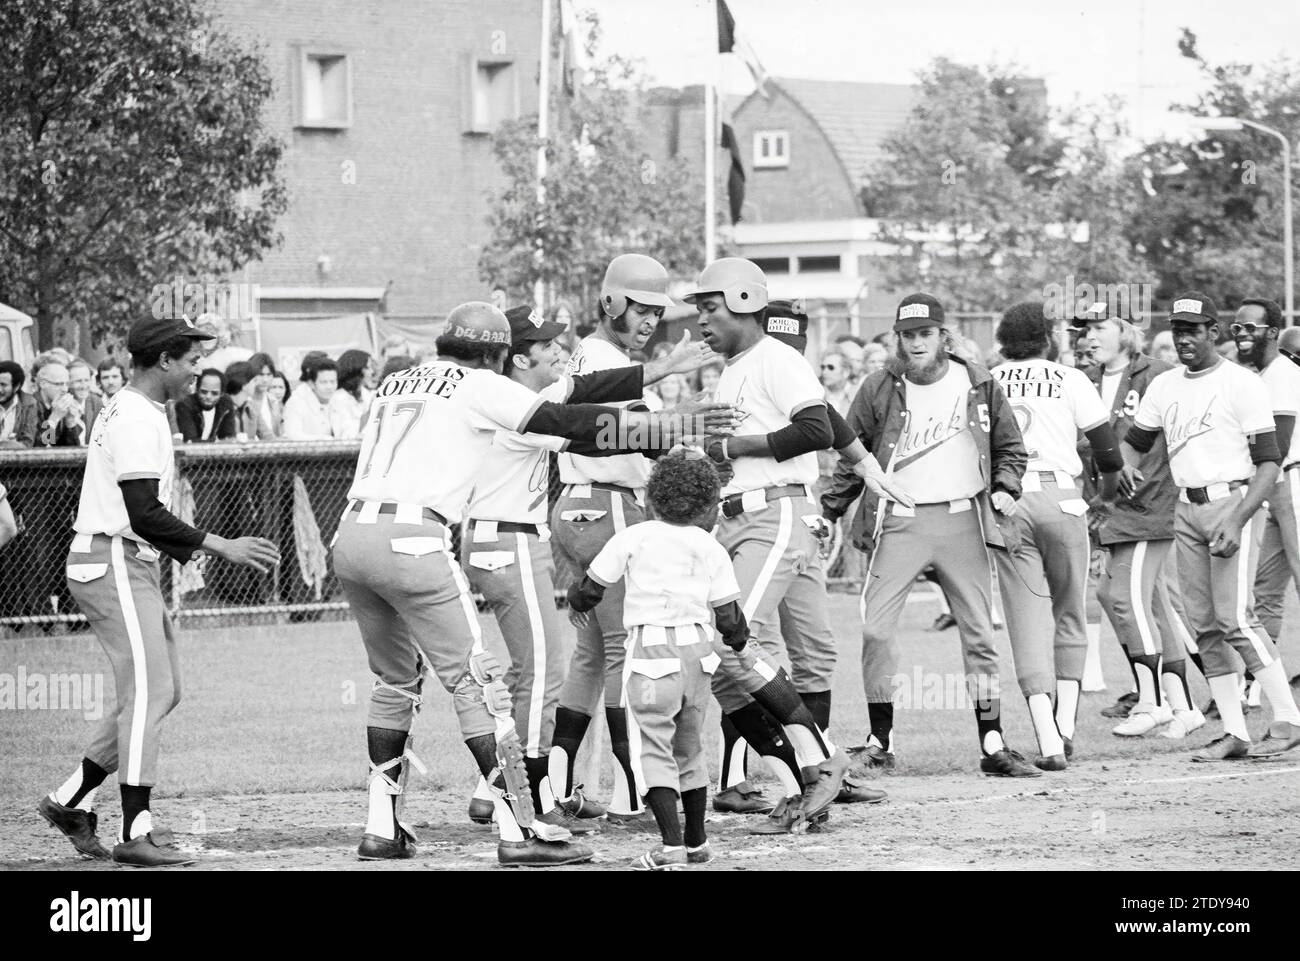 Baseball Action '68 - Dorlas Quick, Baseball, 07-09-1975, Whizgle News from the Past, Tailored for the Future. Explore historical narratives, Dutch The Netherlands agency image with a modern perspective, bridging the gap between yesterday's events and tomorrow's insights. A timeless journey shaping the stories that shape our future. Stock Photo